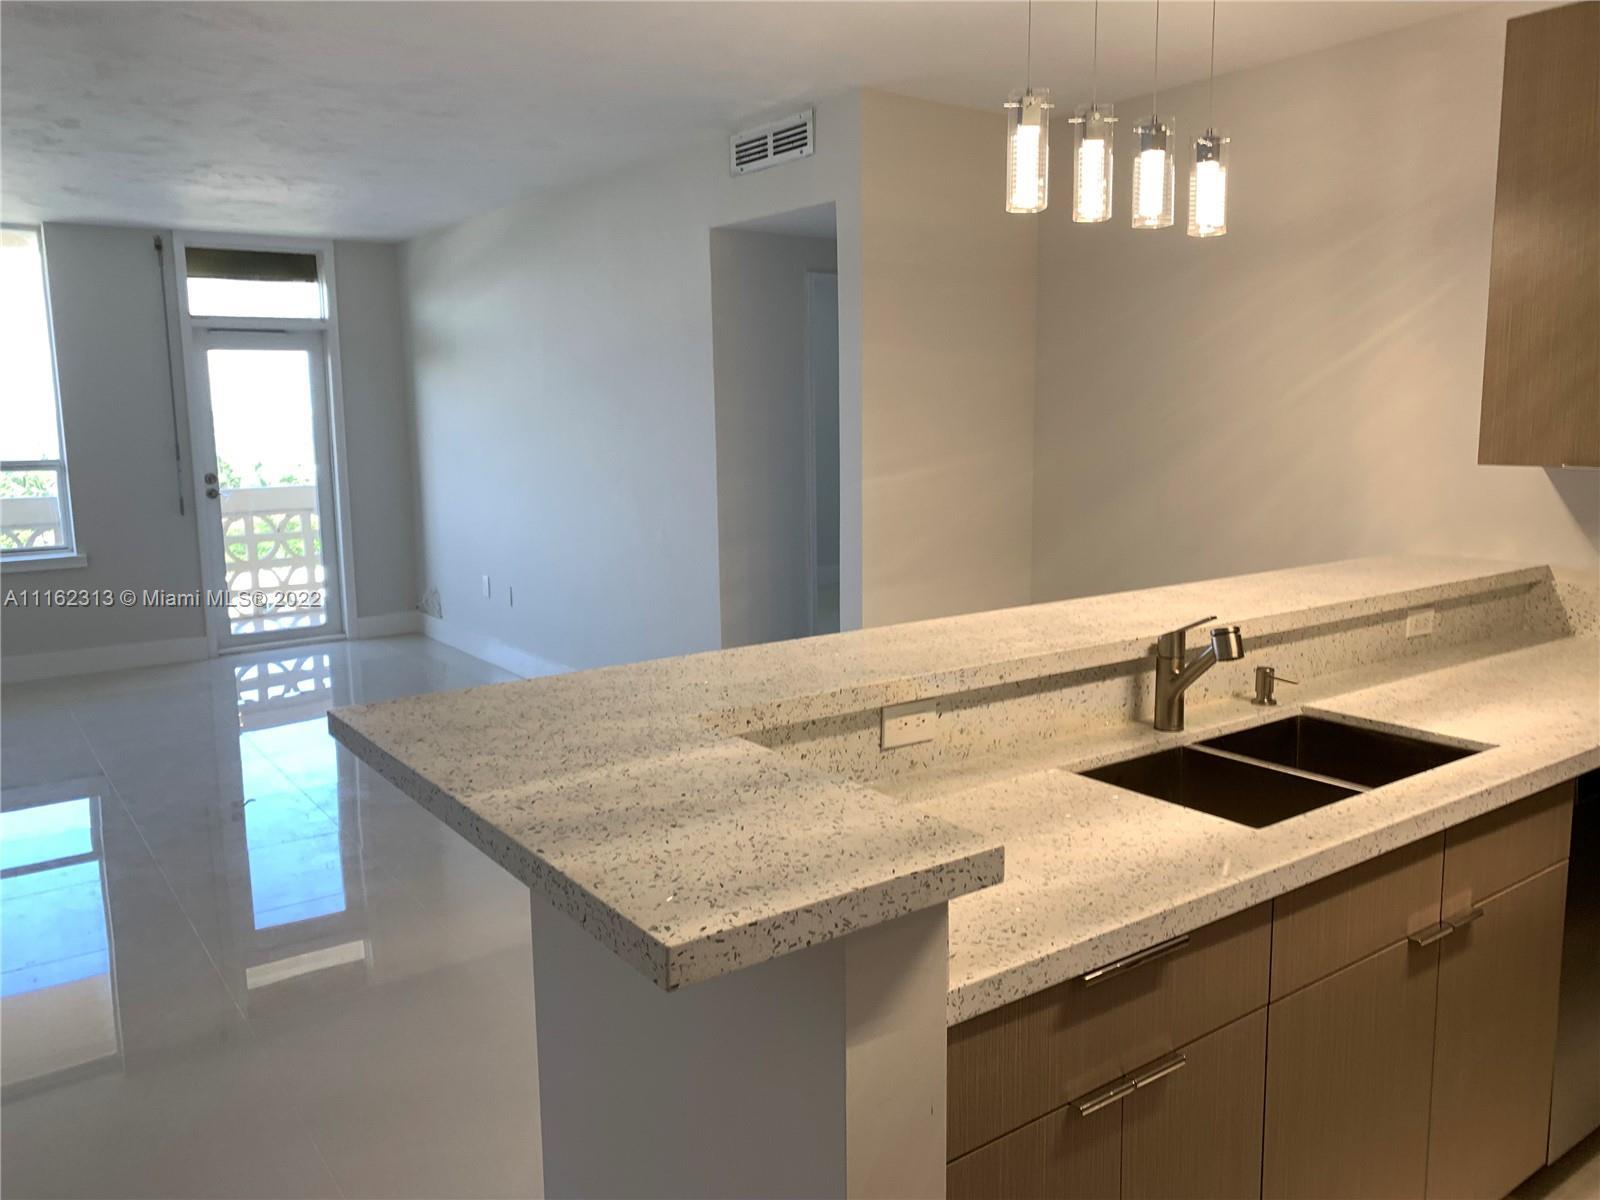 Completely renovated unit in an oceanfront building in Bal Harbor. This 1 Bedroom/DEN & 2 full baths